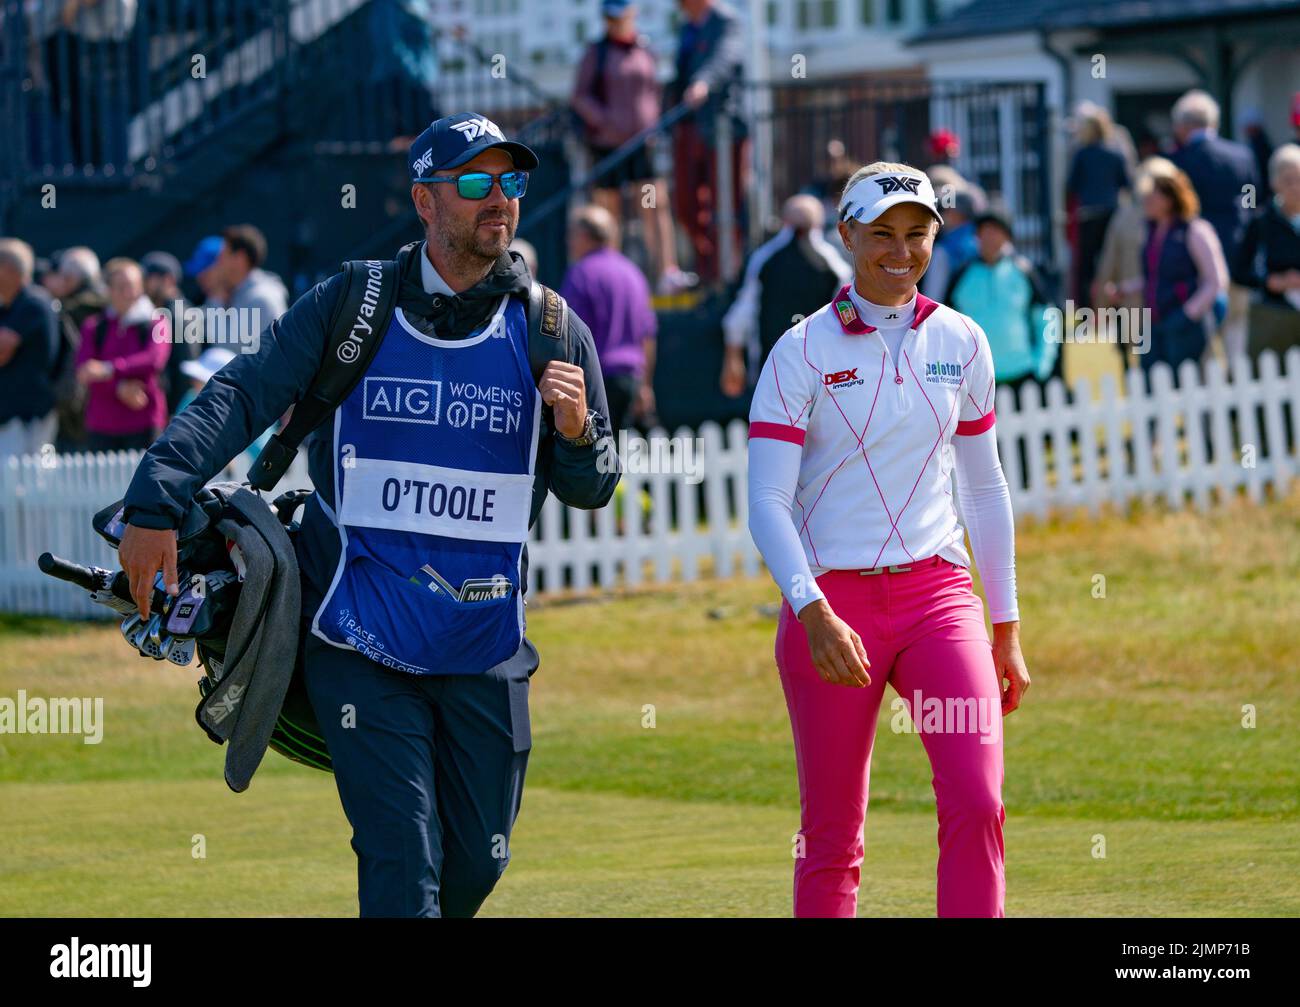 Gullane, Scotland, UK. 7th August 2022. Final  round of the AIG Women’s Open golf championship at Muirfield in East Lothian. Pic;  Ryann O’ Toole at the first hole. Iain Masterton/Alamy Live News Stock Photo